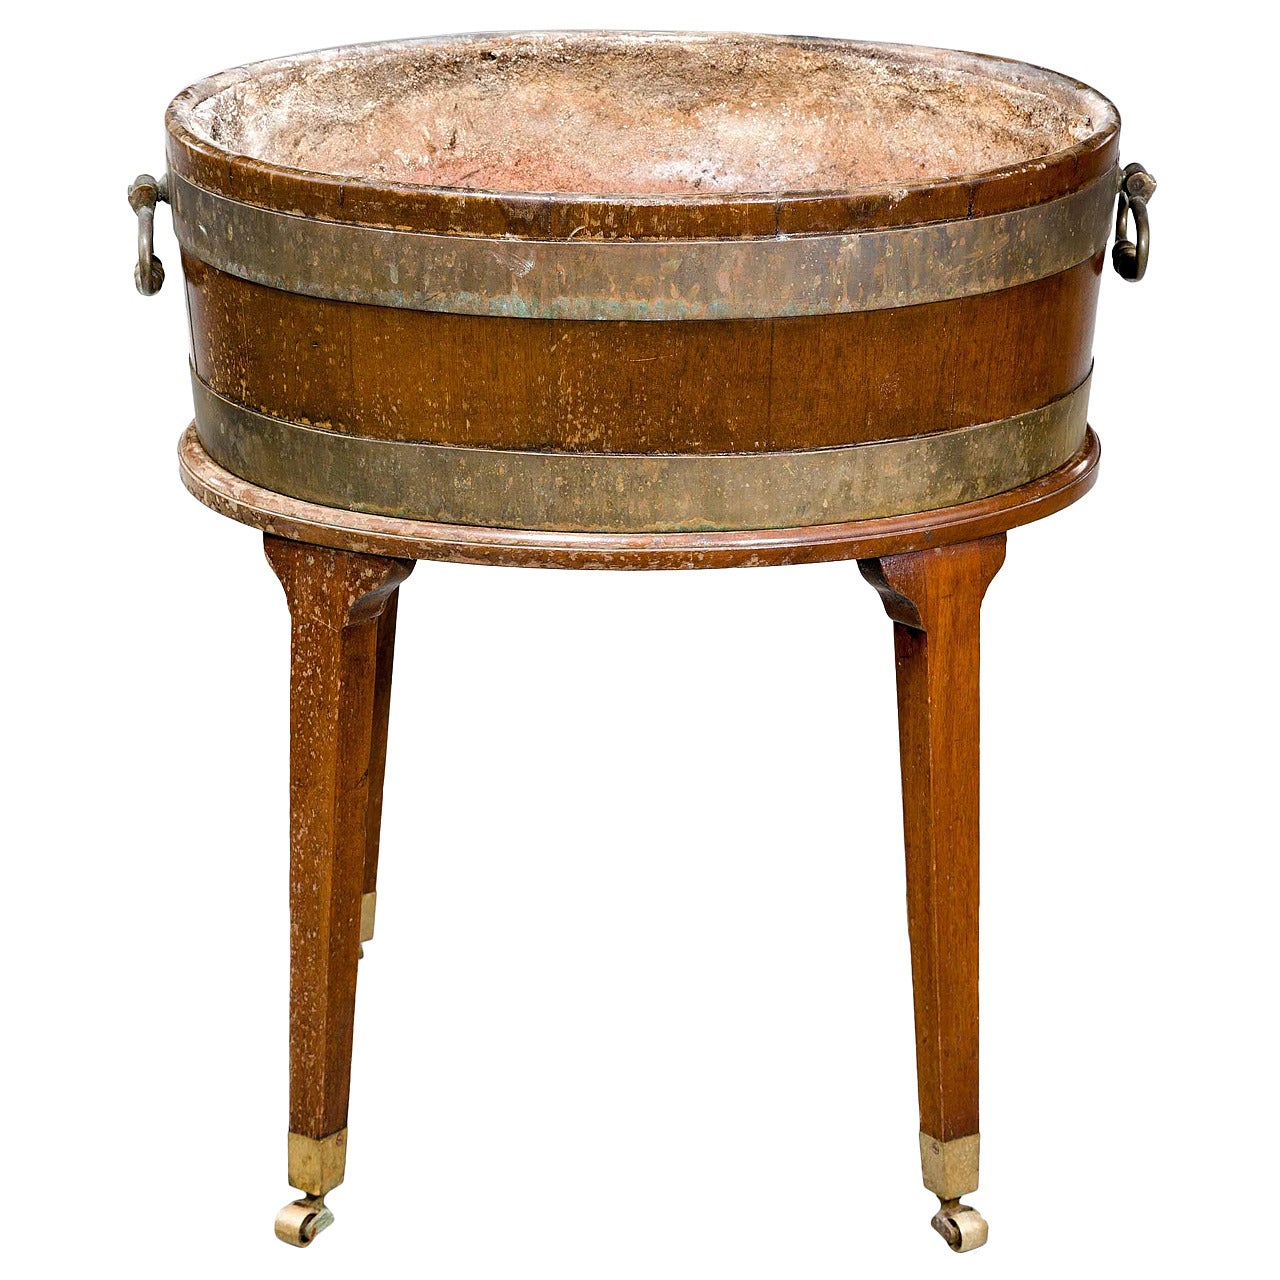 George III Period Wine Cooler on a High Stand